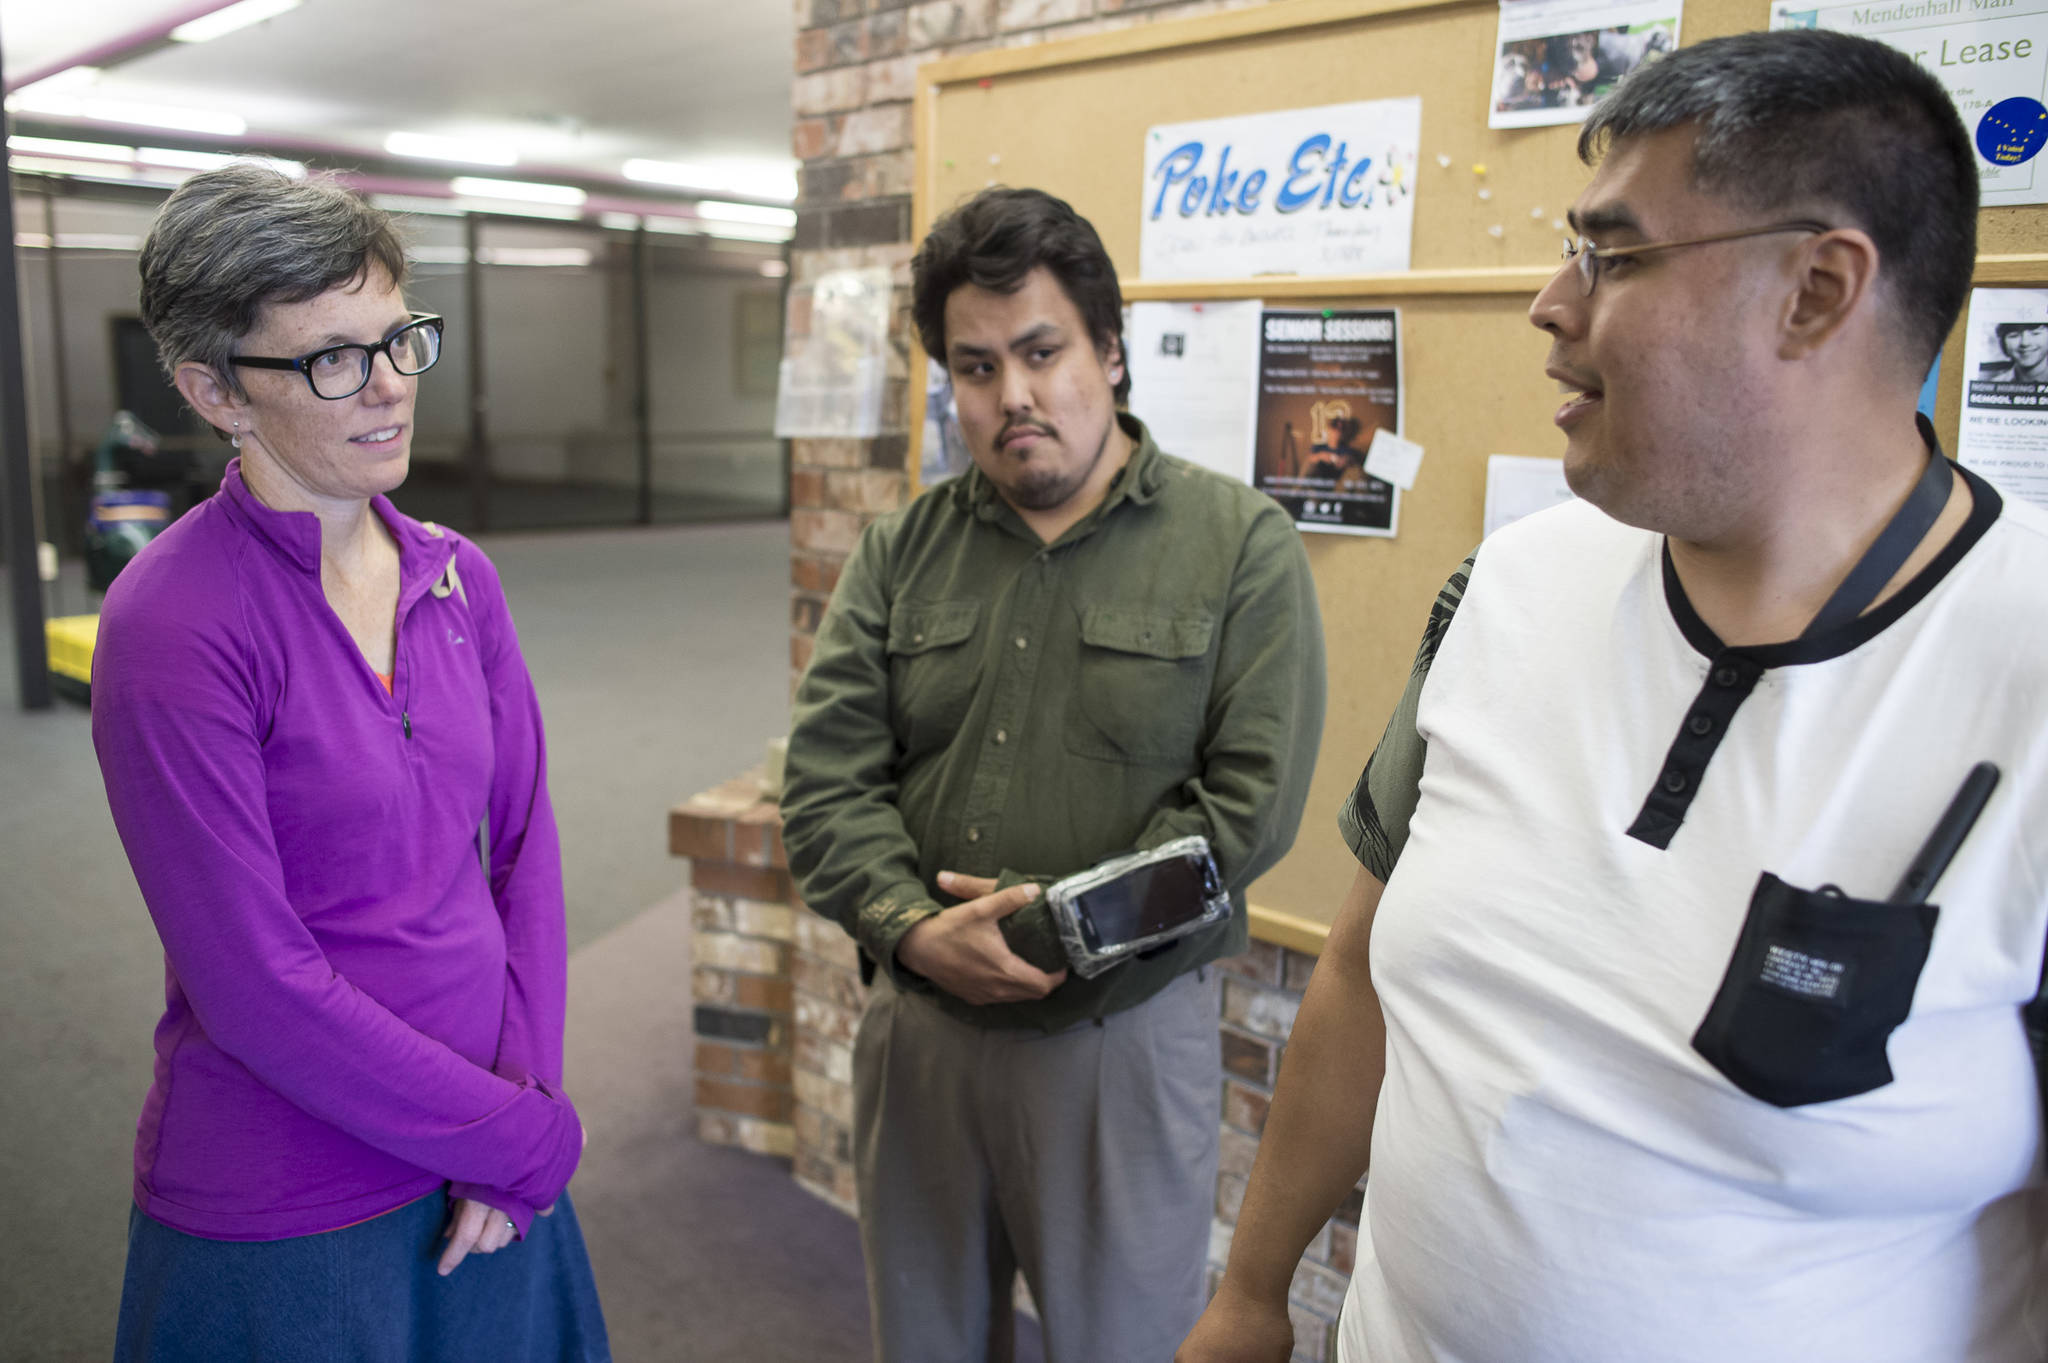 Kim Champney, a disability advocate, meets with Melvin Starr, center, and Luis Hernandez to hang posters at the Mendenhall Mall advertising this weekend’s Disability Pride Celebration. The celebration is Saturday, July 21, from 3 to 5 p.m. at Marine Park. (Michael Penn | Juneau Empire)